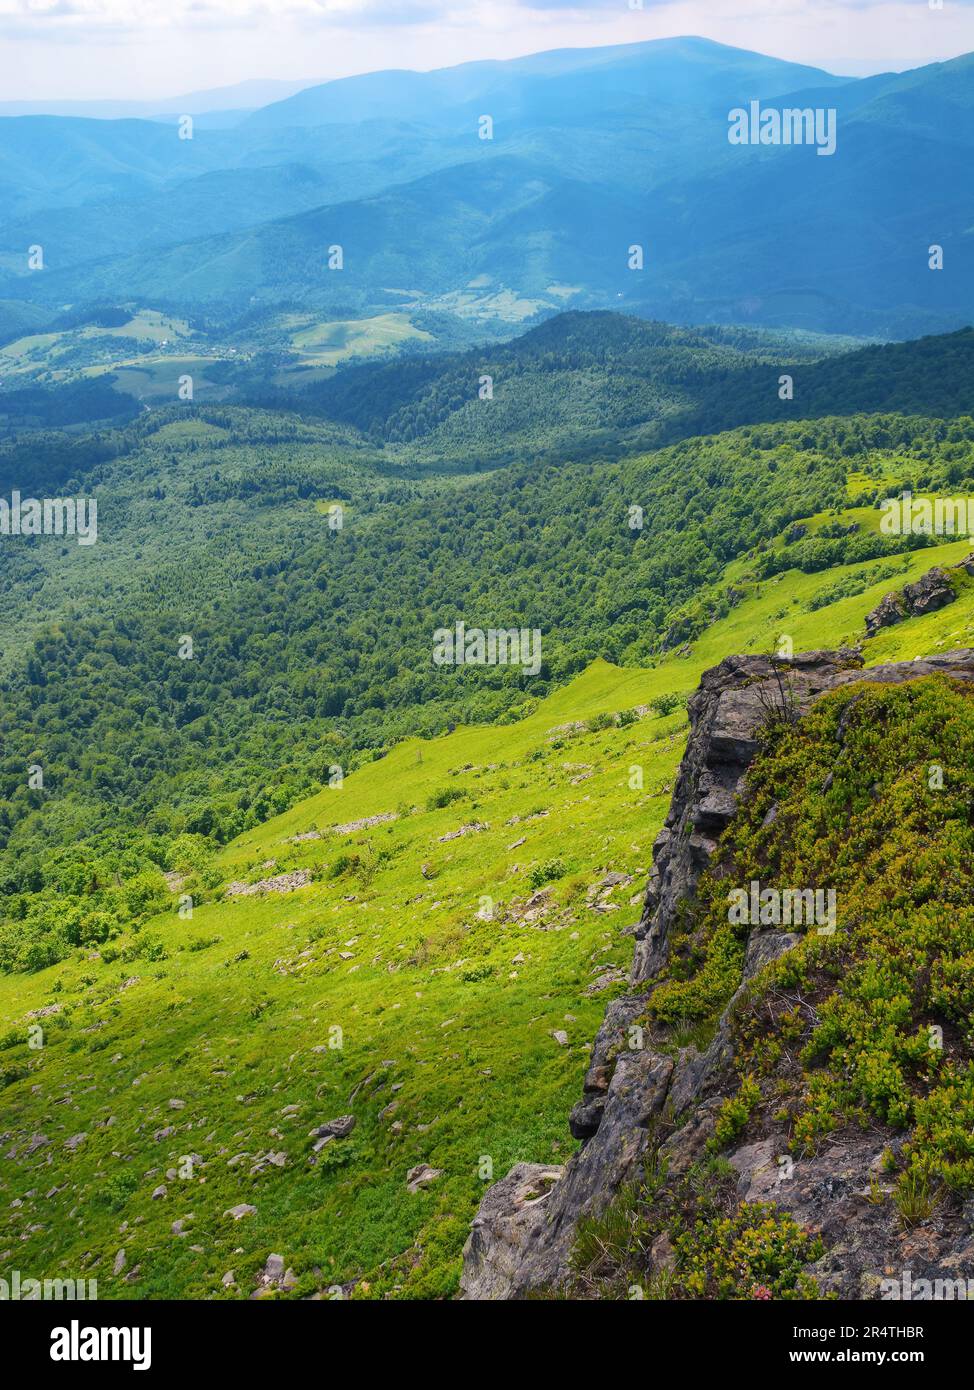 carpathian watershed ridge. stones and boulders on the green grassy hills. open view to distant mountain. hot summer day Stock Photo